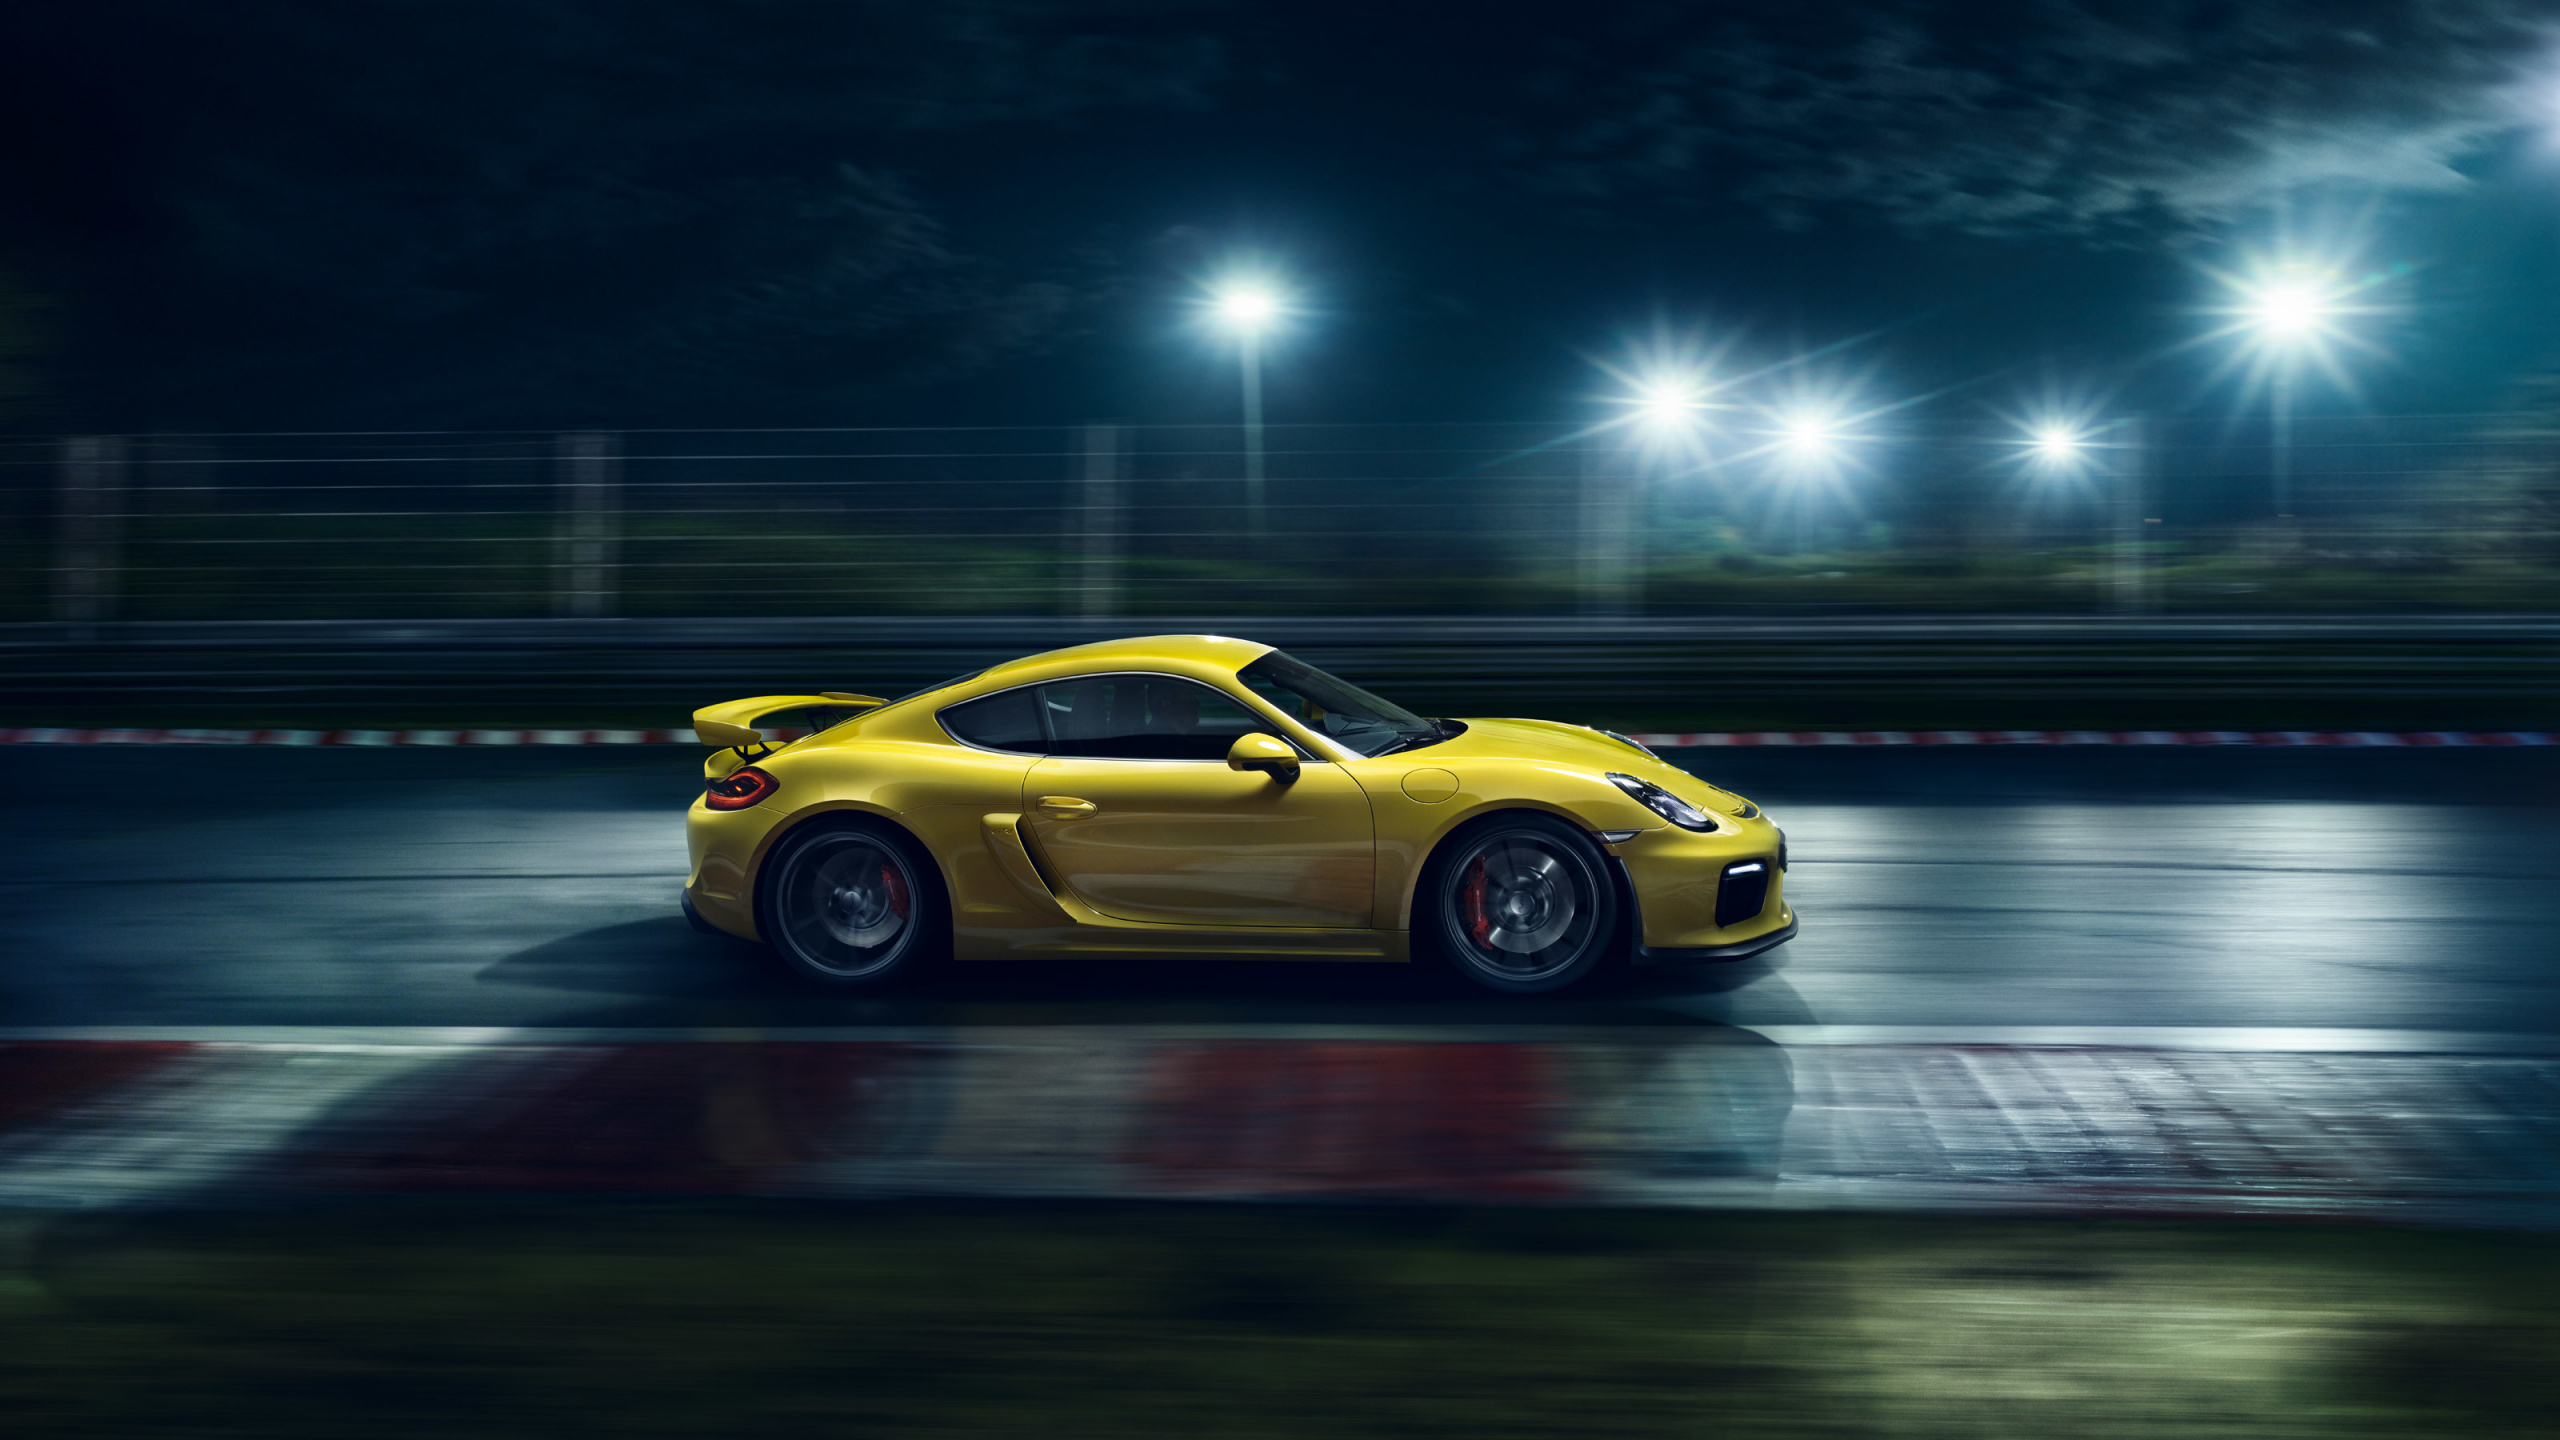 Yellow Porsche 911 on Road at Night. Wallpaper in 2560x1440 Resolution